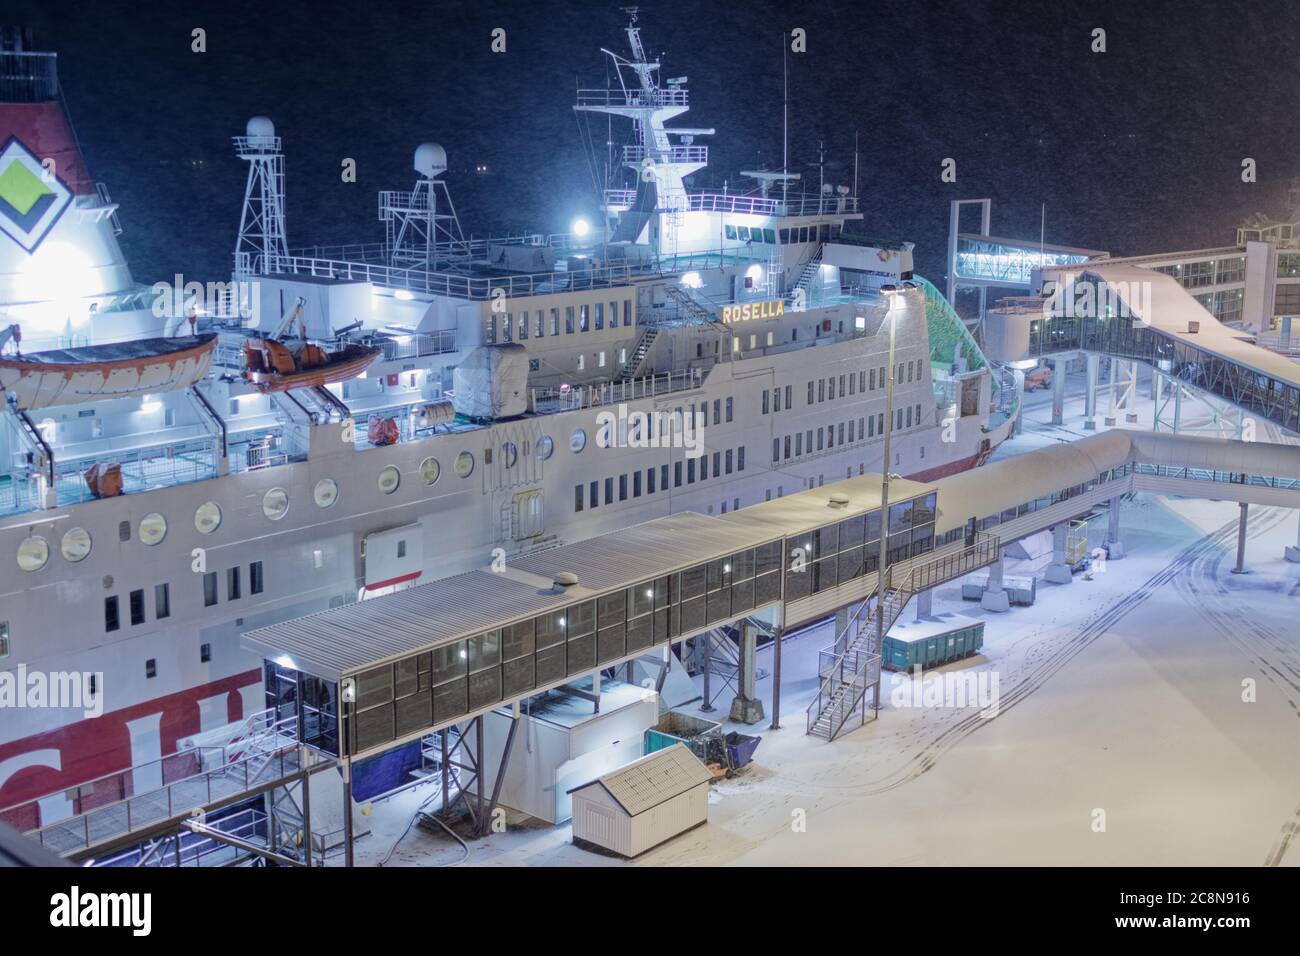 Winter cruise: MS Rosella, a cruise ferry ship operated by Viking Line, in the port of Mariehamn, Åland Islands, Finland, under night snow storm Stock Photo